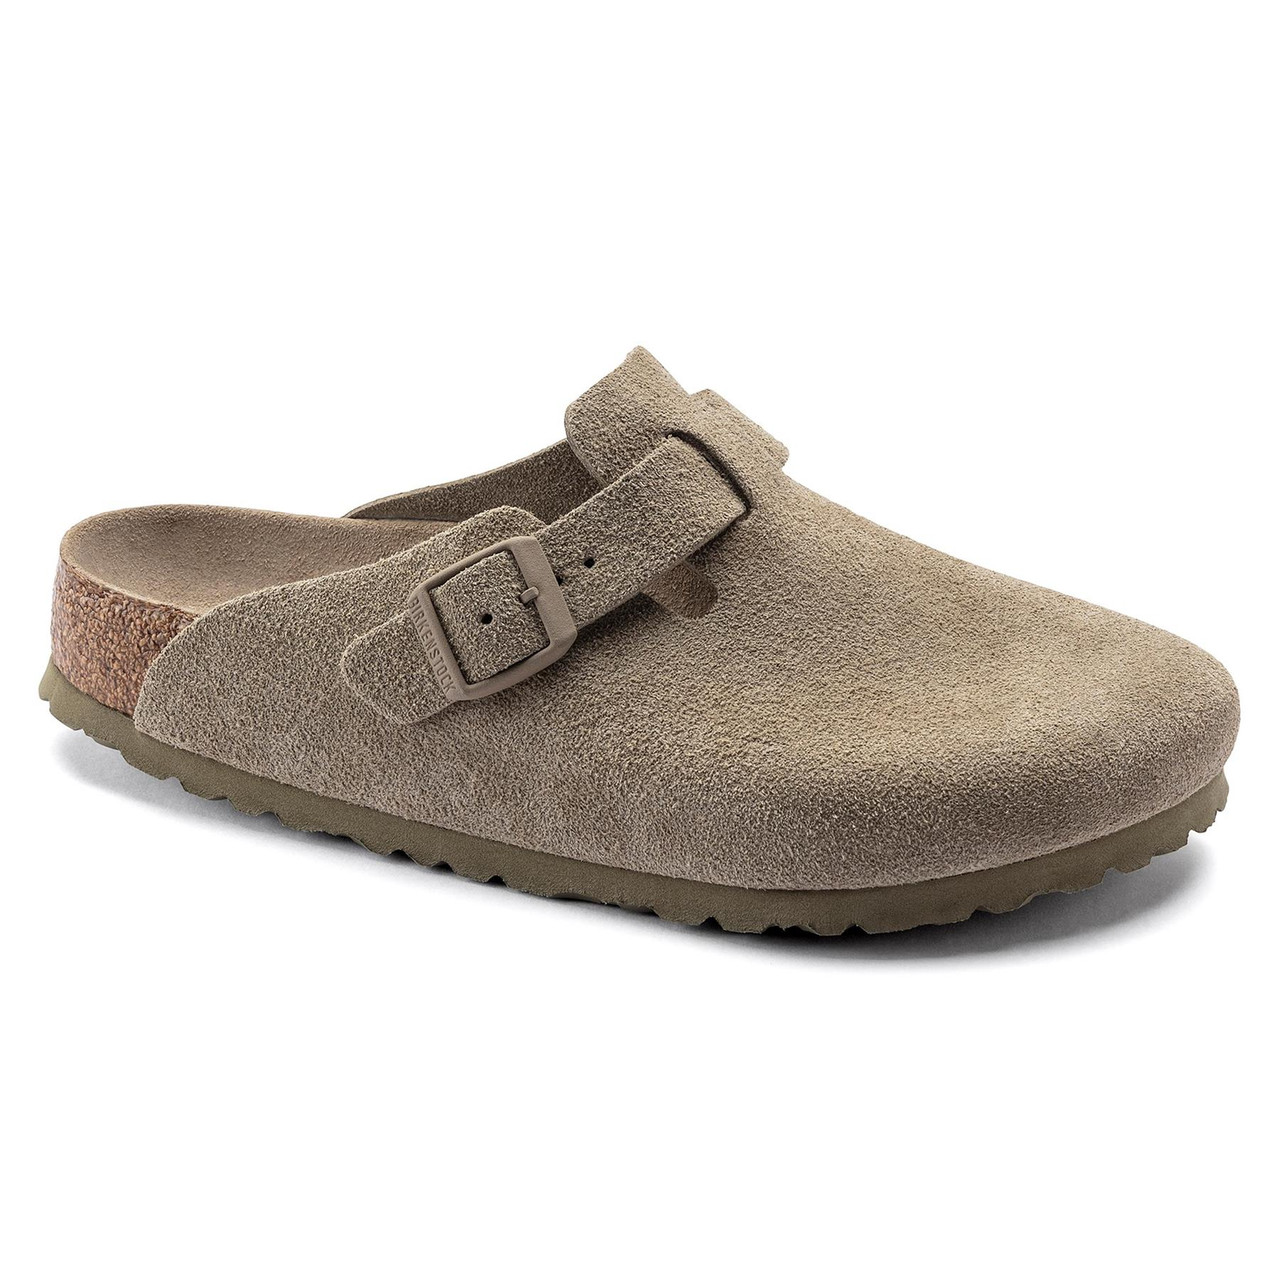 What distinguishes the Birkenstock Unisex Boston Soft Footbed Suede Leather Clog's special features?